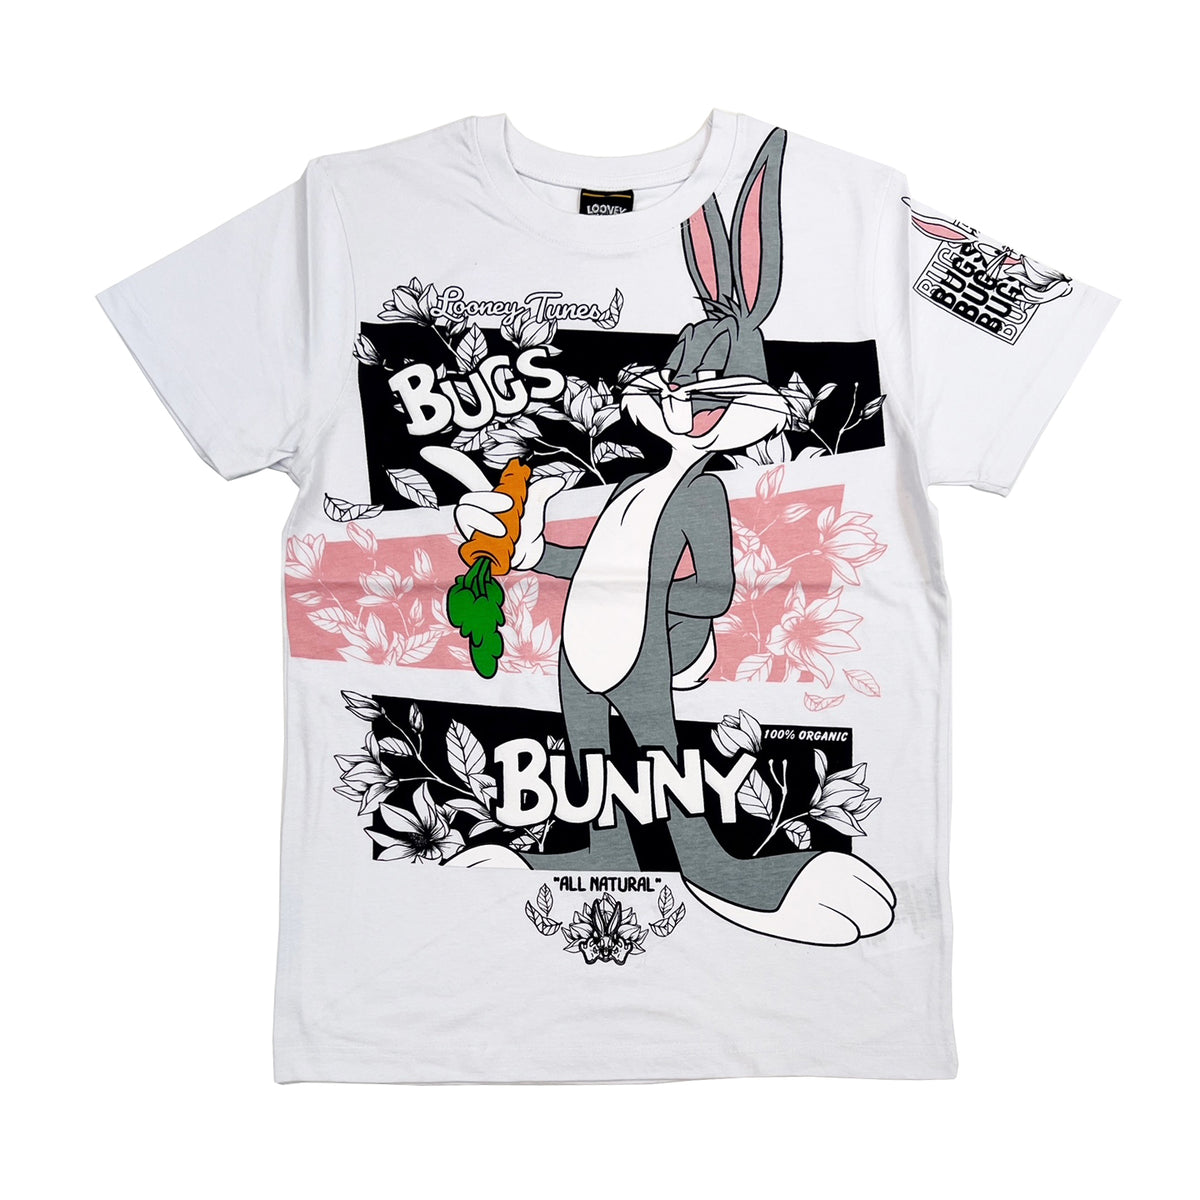 Bugs 2 Bunny $16.99 Tunes / Looney for (White) $30 Tee